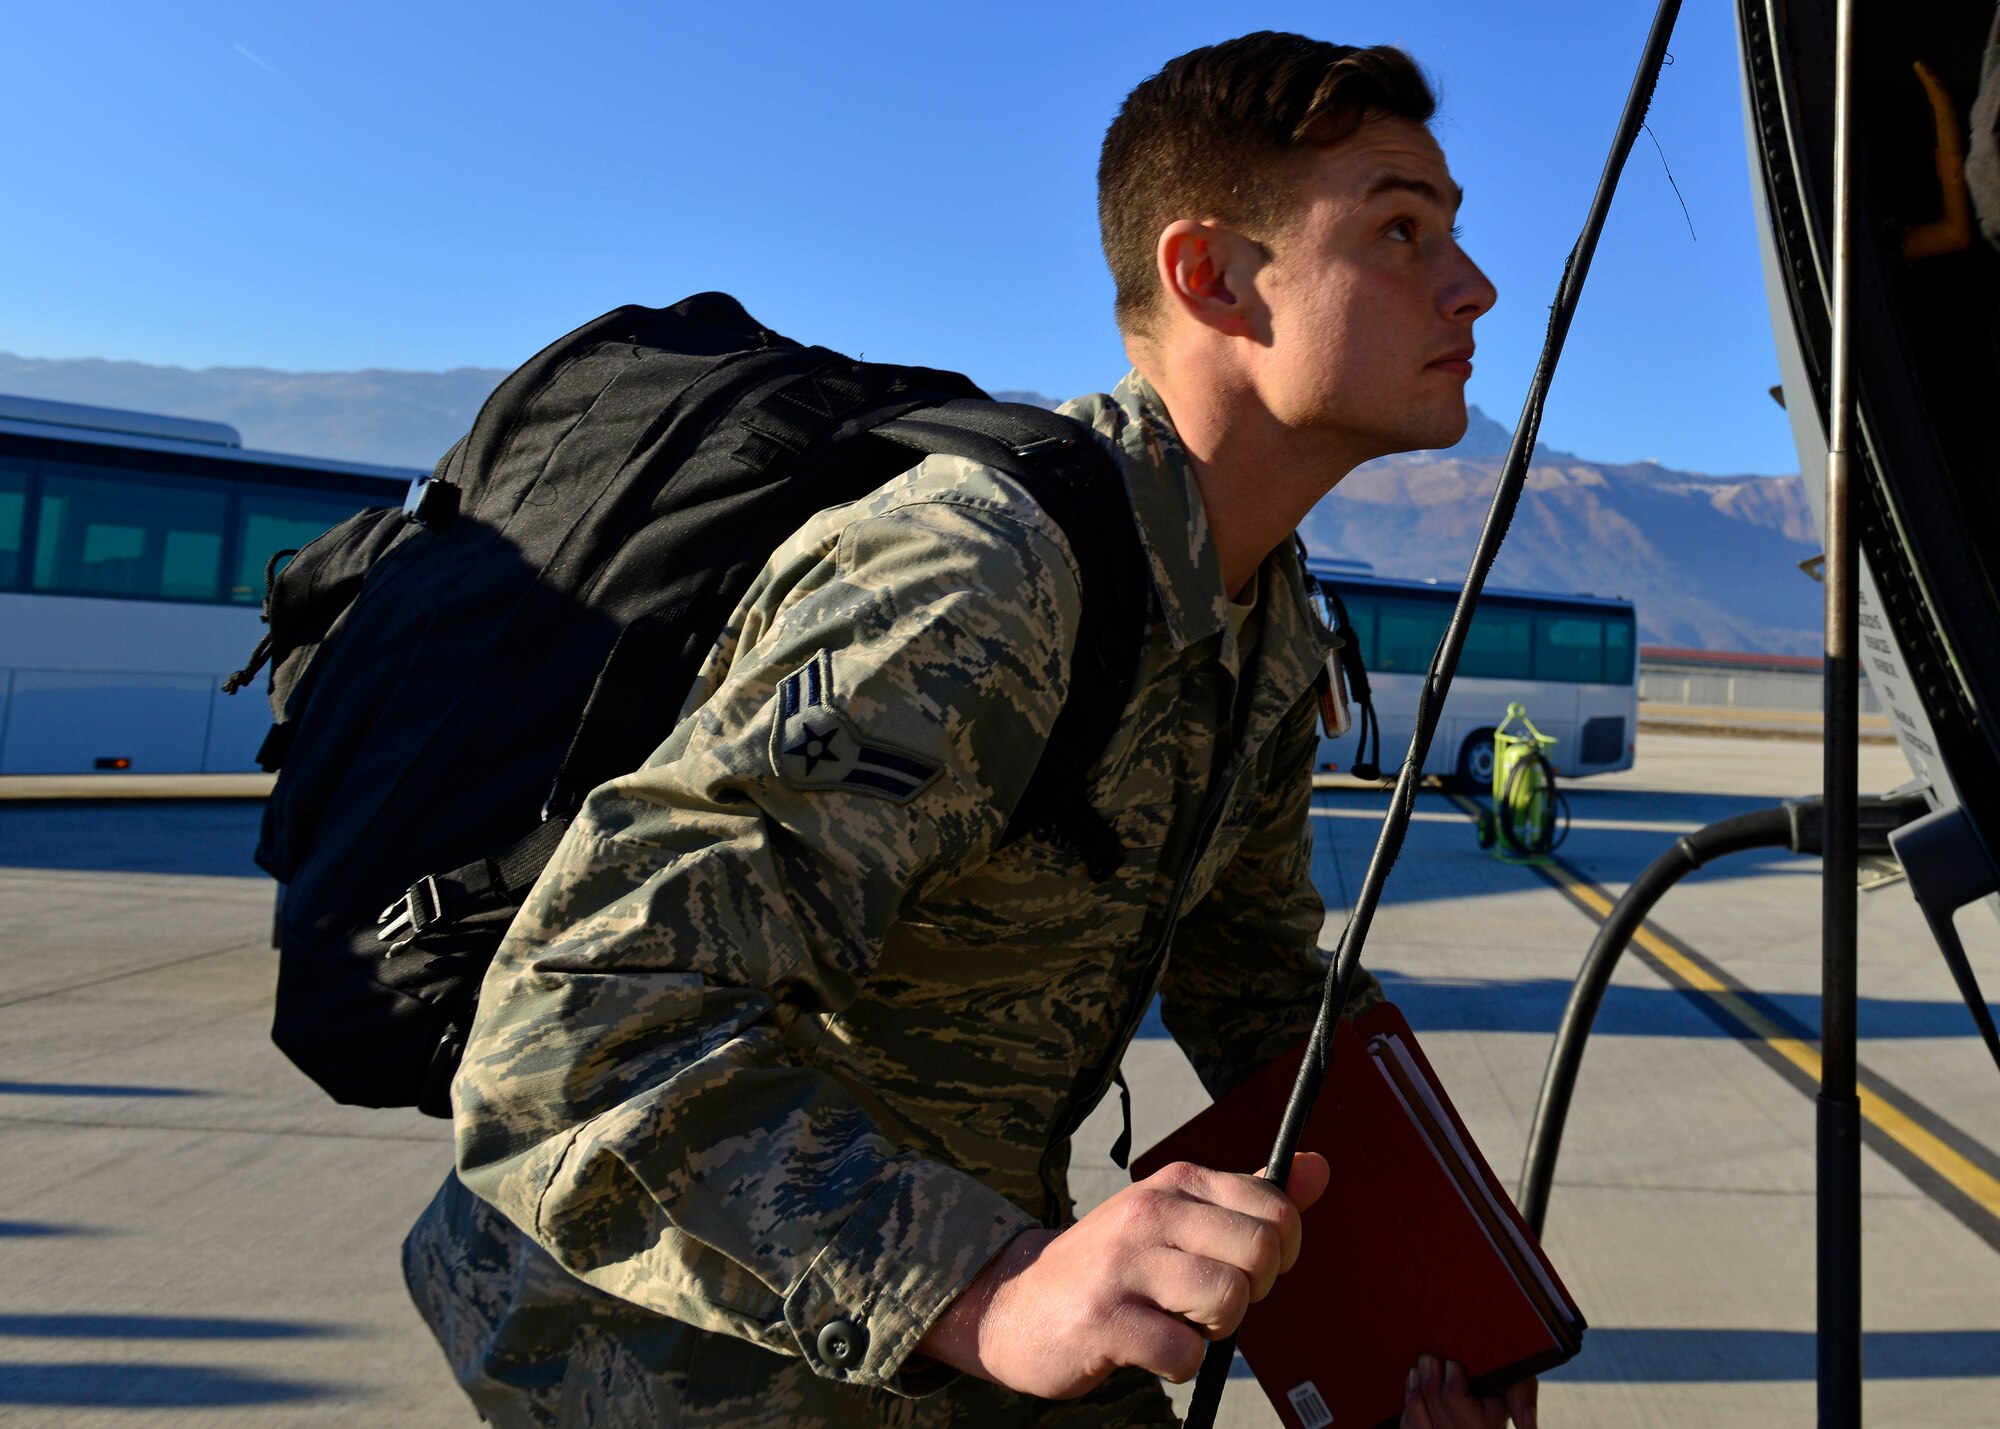 An Airman from the 31st Fighter Wing boards a C-130 Hercules at Aviano Air Base, Italy on Jan. 21, 2017 on their way to Souda Bay, Greece. The Airmen traveled to Souda Bay, Greece, to support a flying training detachment with the Hellenic air force. (U.S. Air Force photo by Senior Airman Cary Smith)